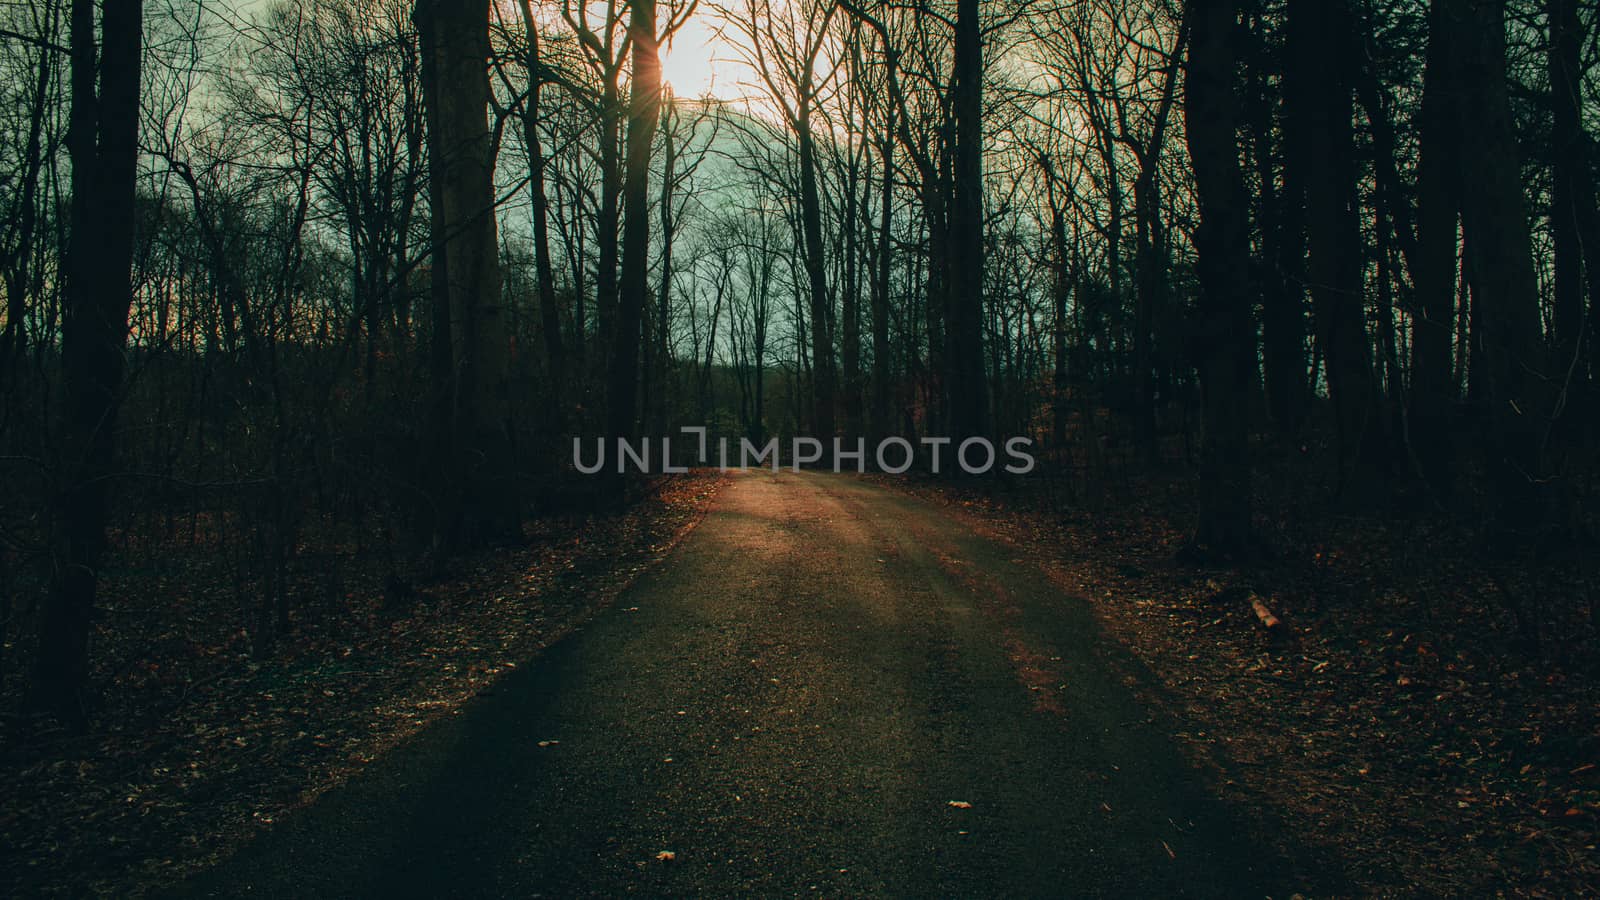 A Blacktop Path in a Dead Winter Forest With a Bright Orange Sunset Behind It